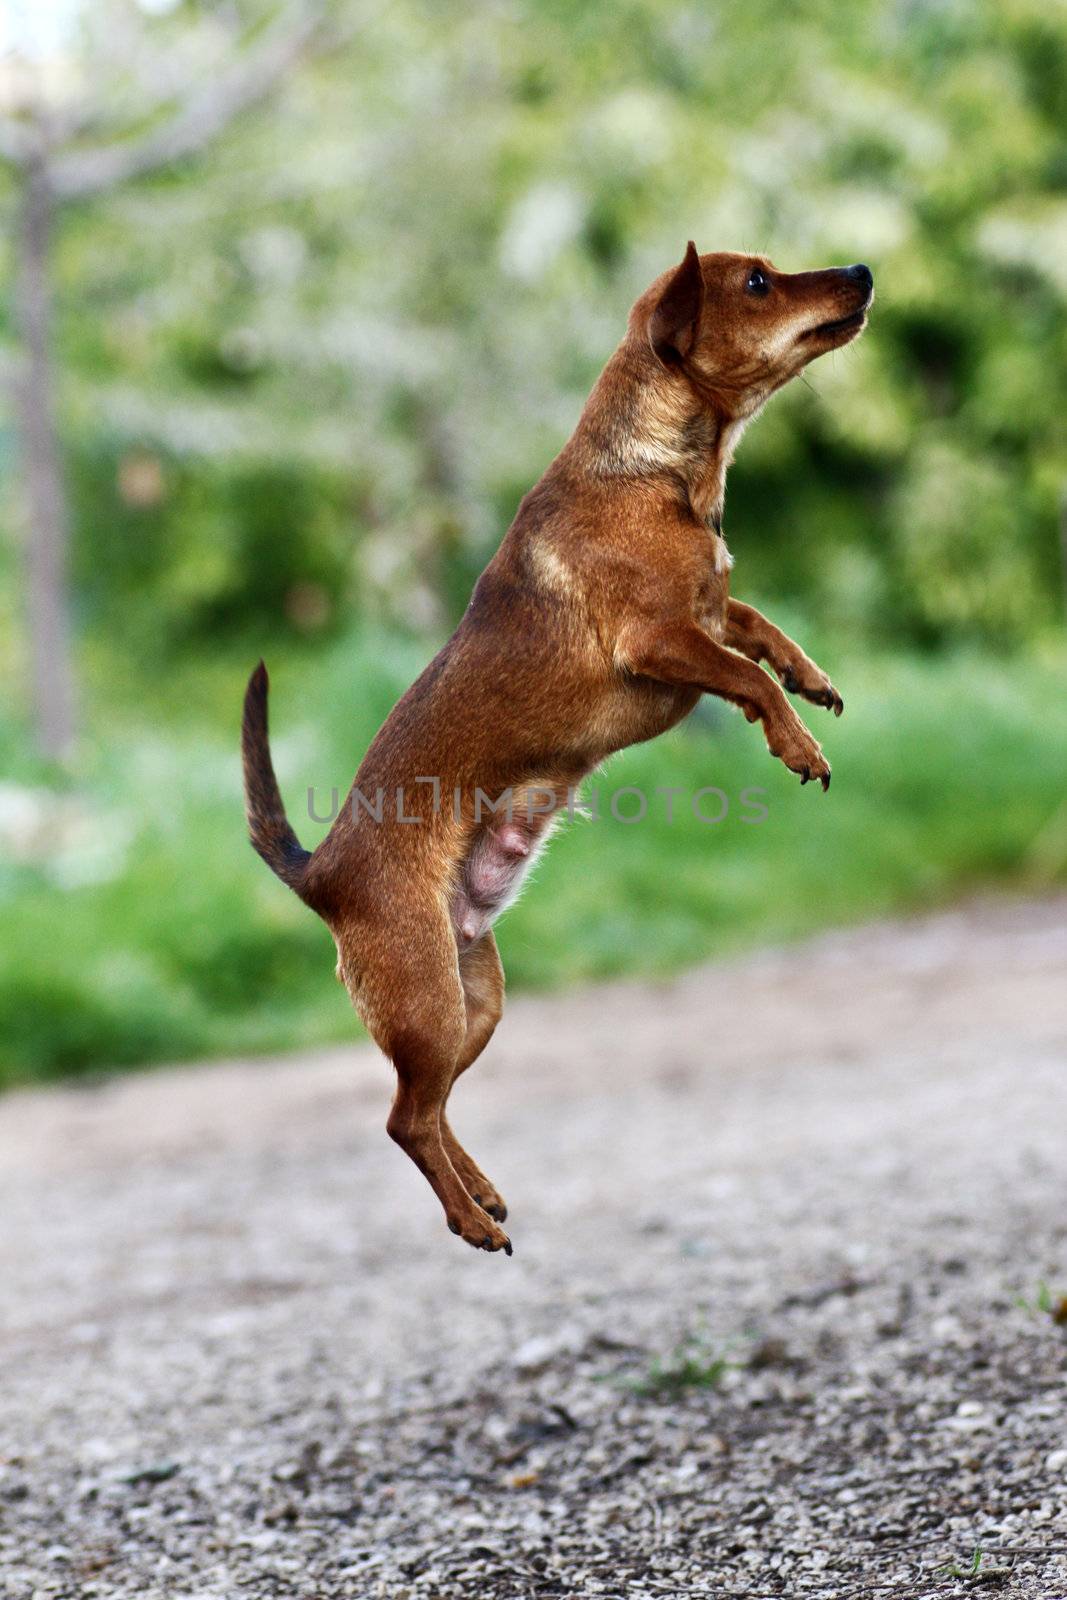 View of small brown dog jumping in the air.